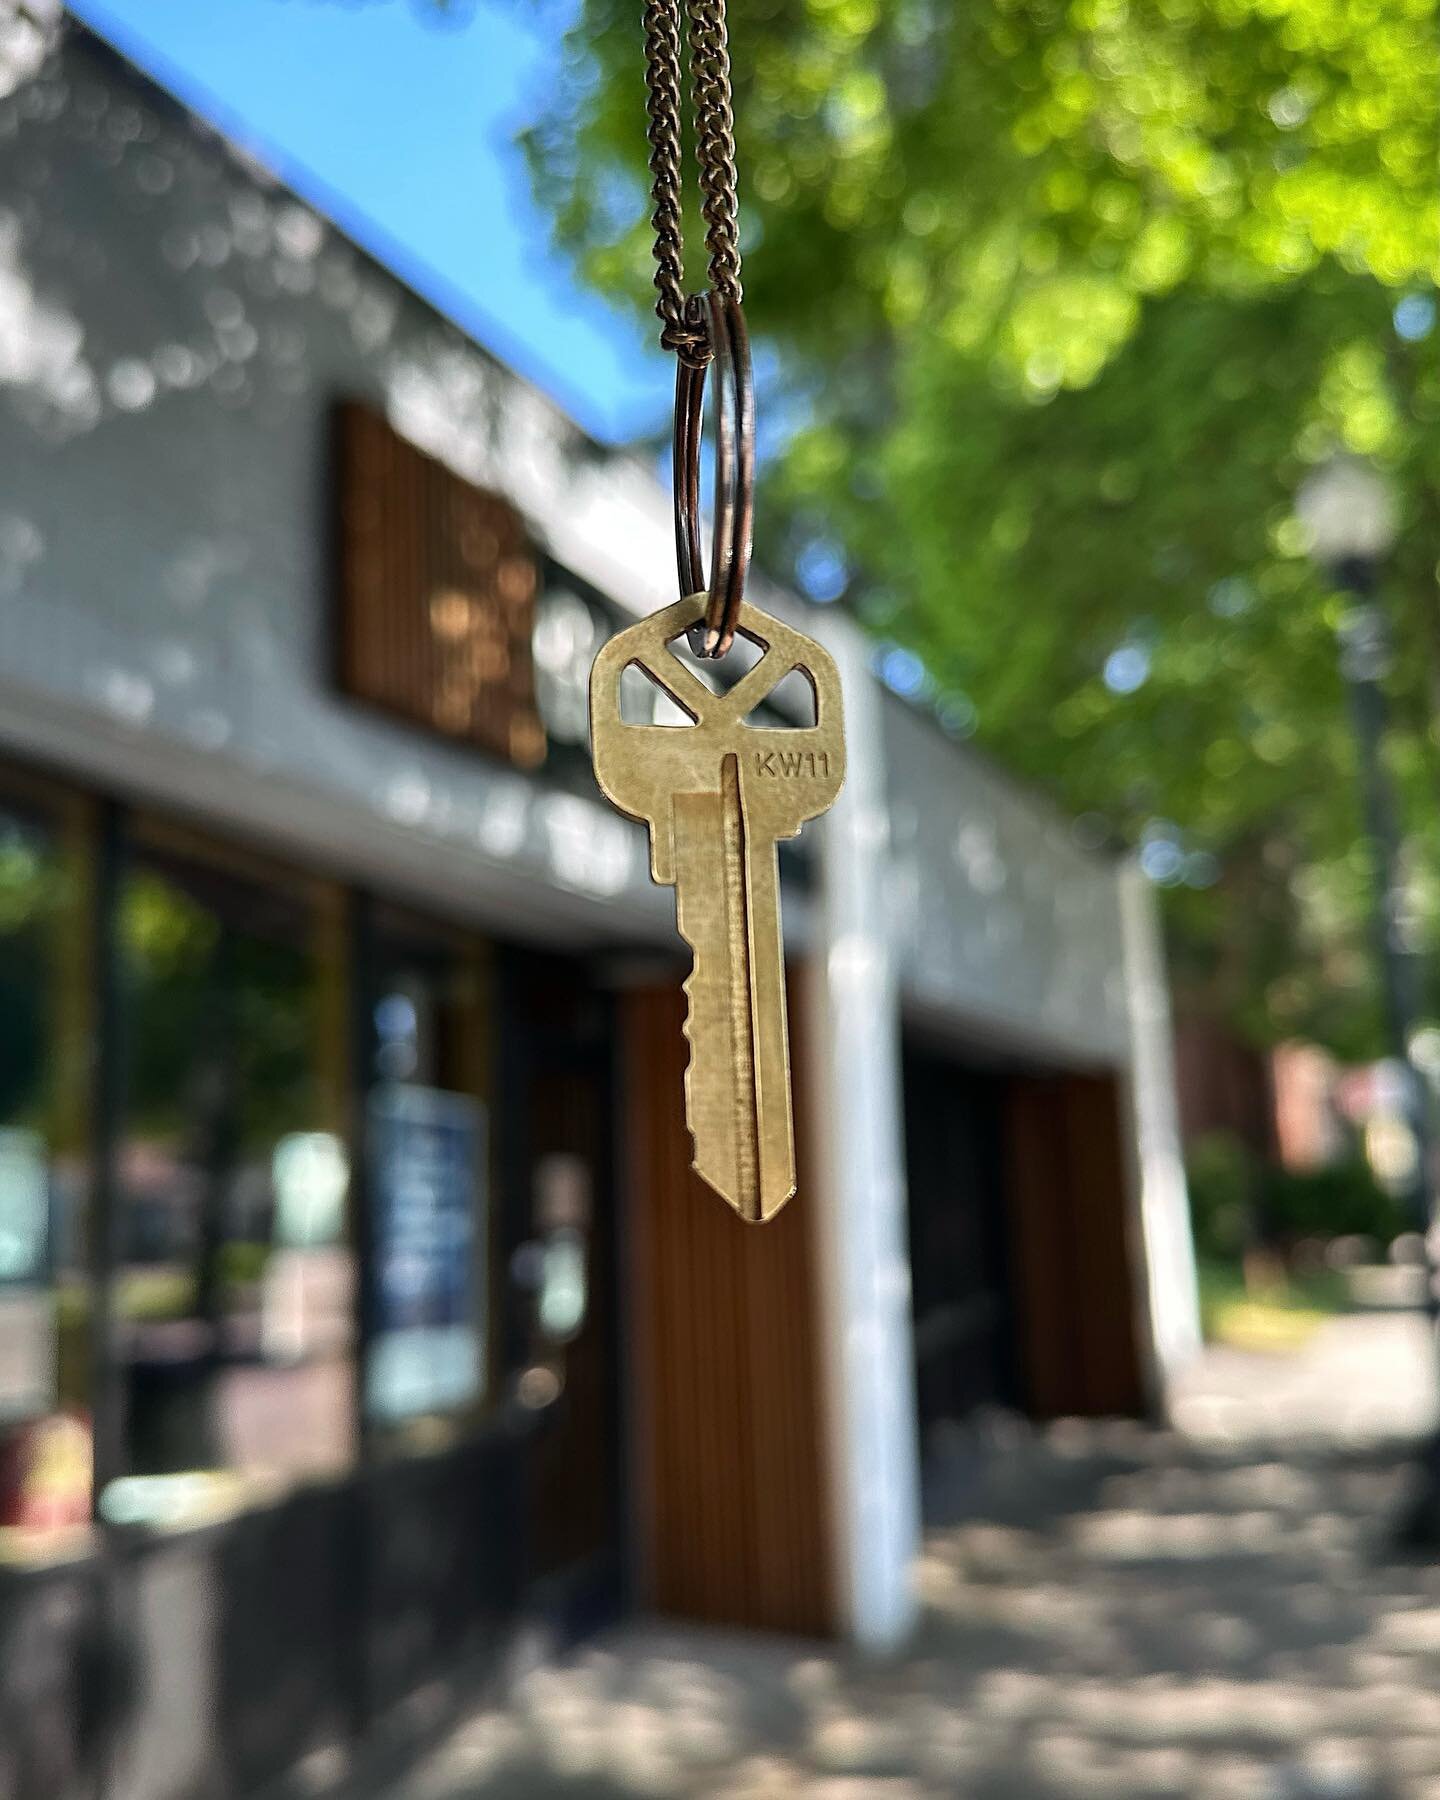 🔑 4680 SW Watson Ave, Beaverton, OR 

Located in the heart of Old Town Beaverton our store front is now under construction!

Fun fact: prior to us taking over, this same space was home to the only latin owned business on Watson Ave for over 20 years